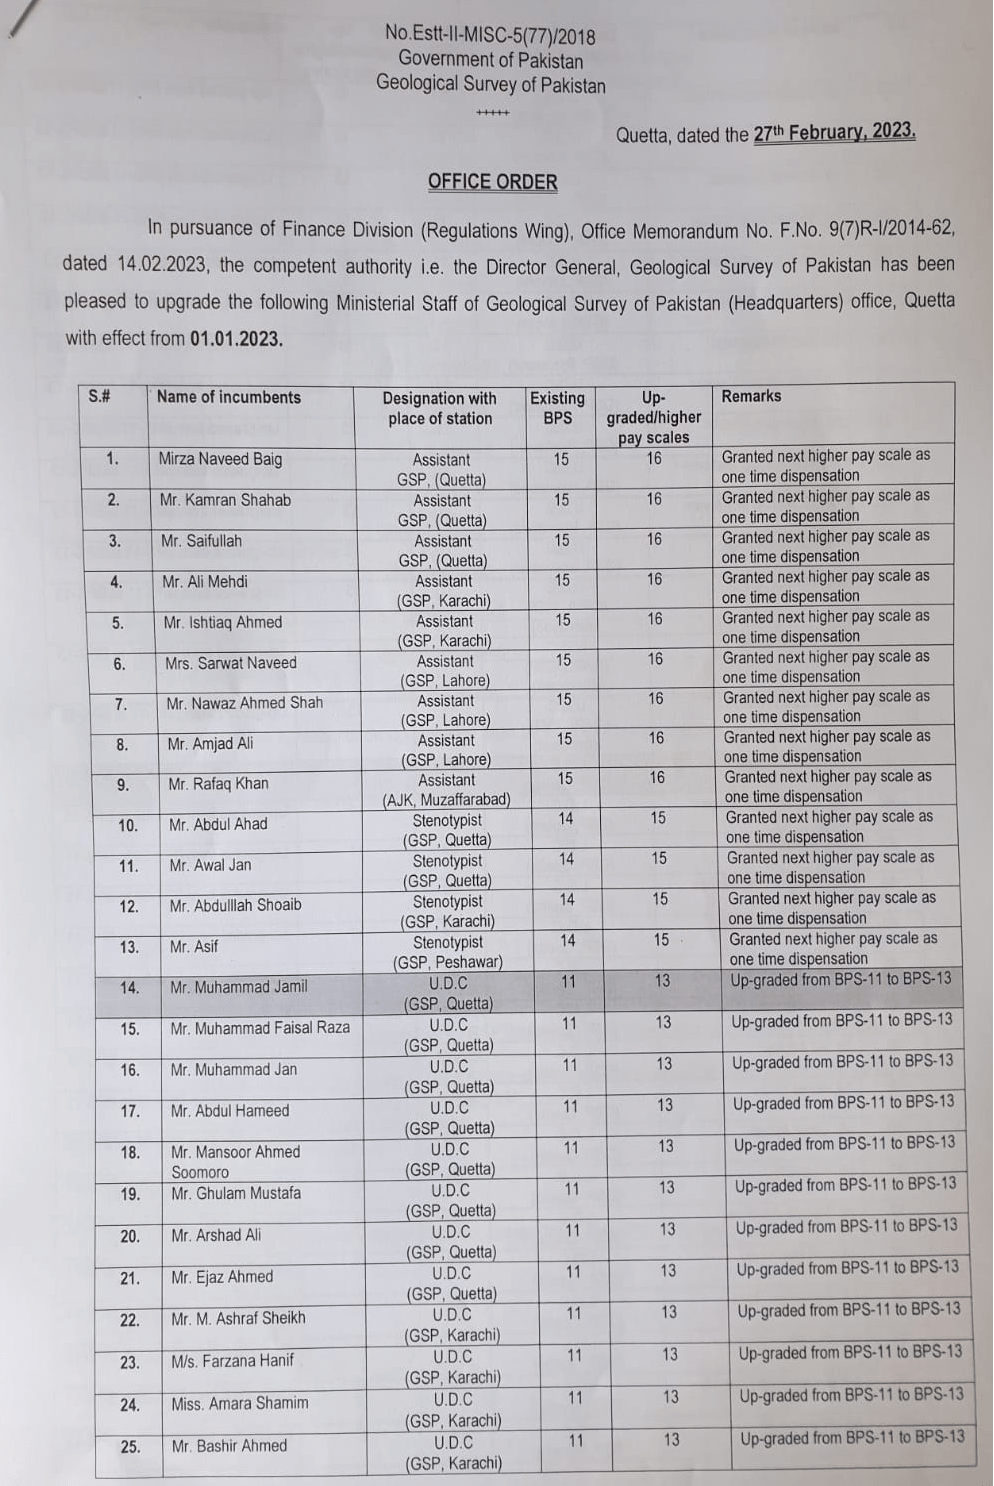 By Name Notification of Upgradation Ministerial Staff UDC, LDC, Assistant, Stenotypist